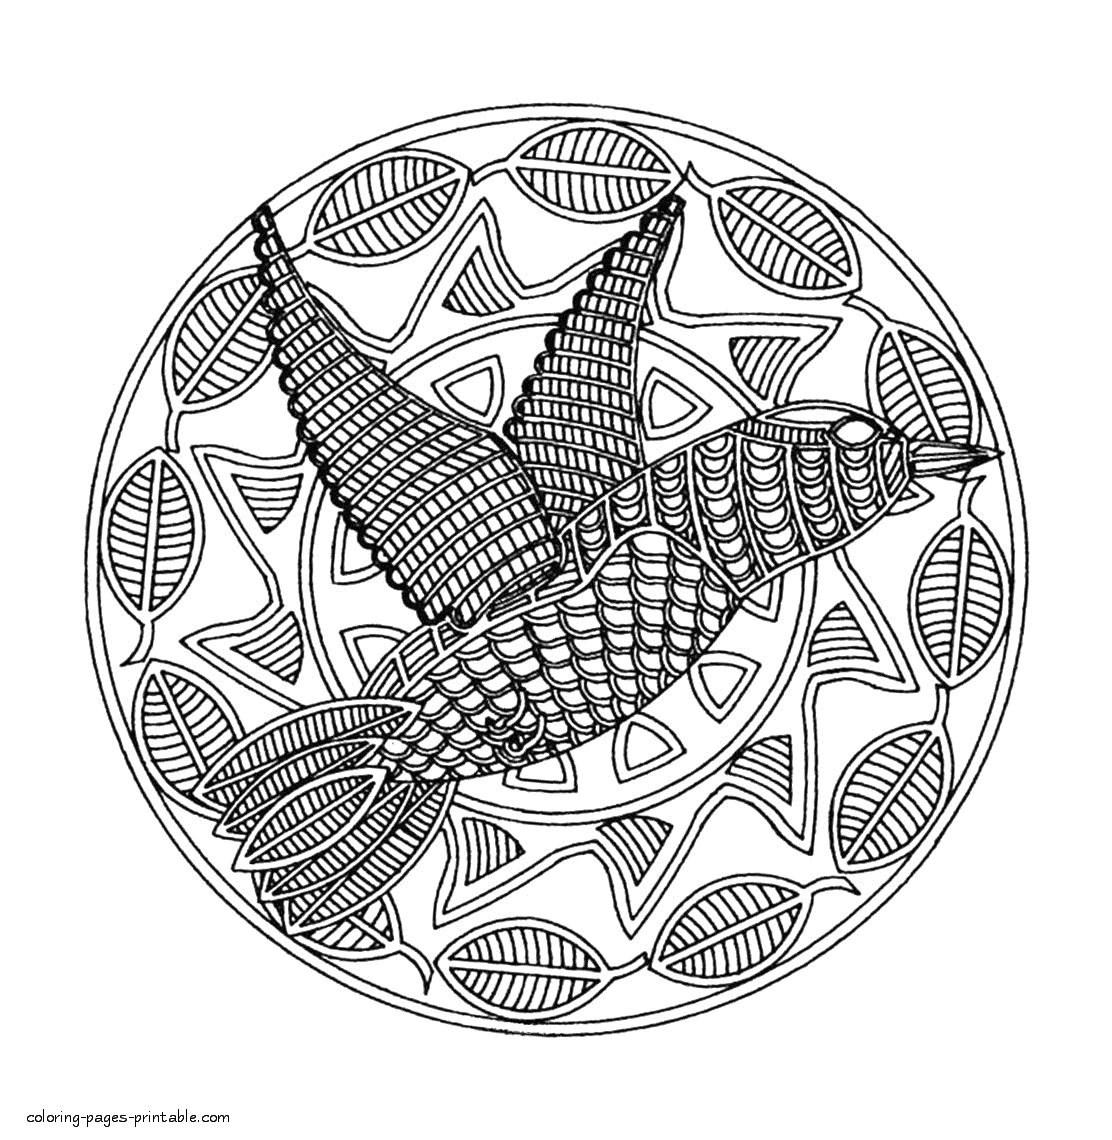 Bird Coloring Pages Mandala : Free Animal Coloring Pages For Adults 001